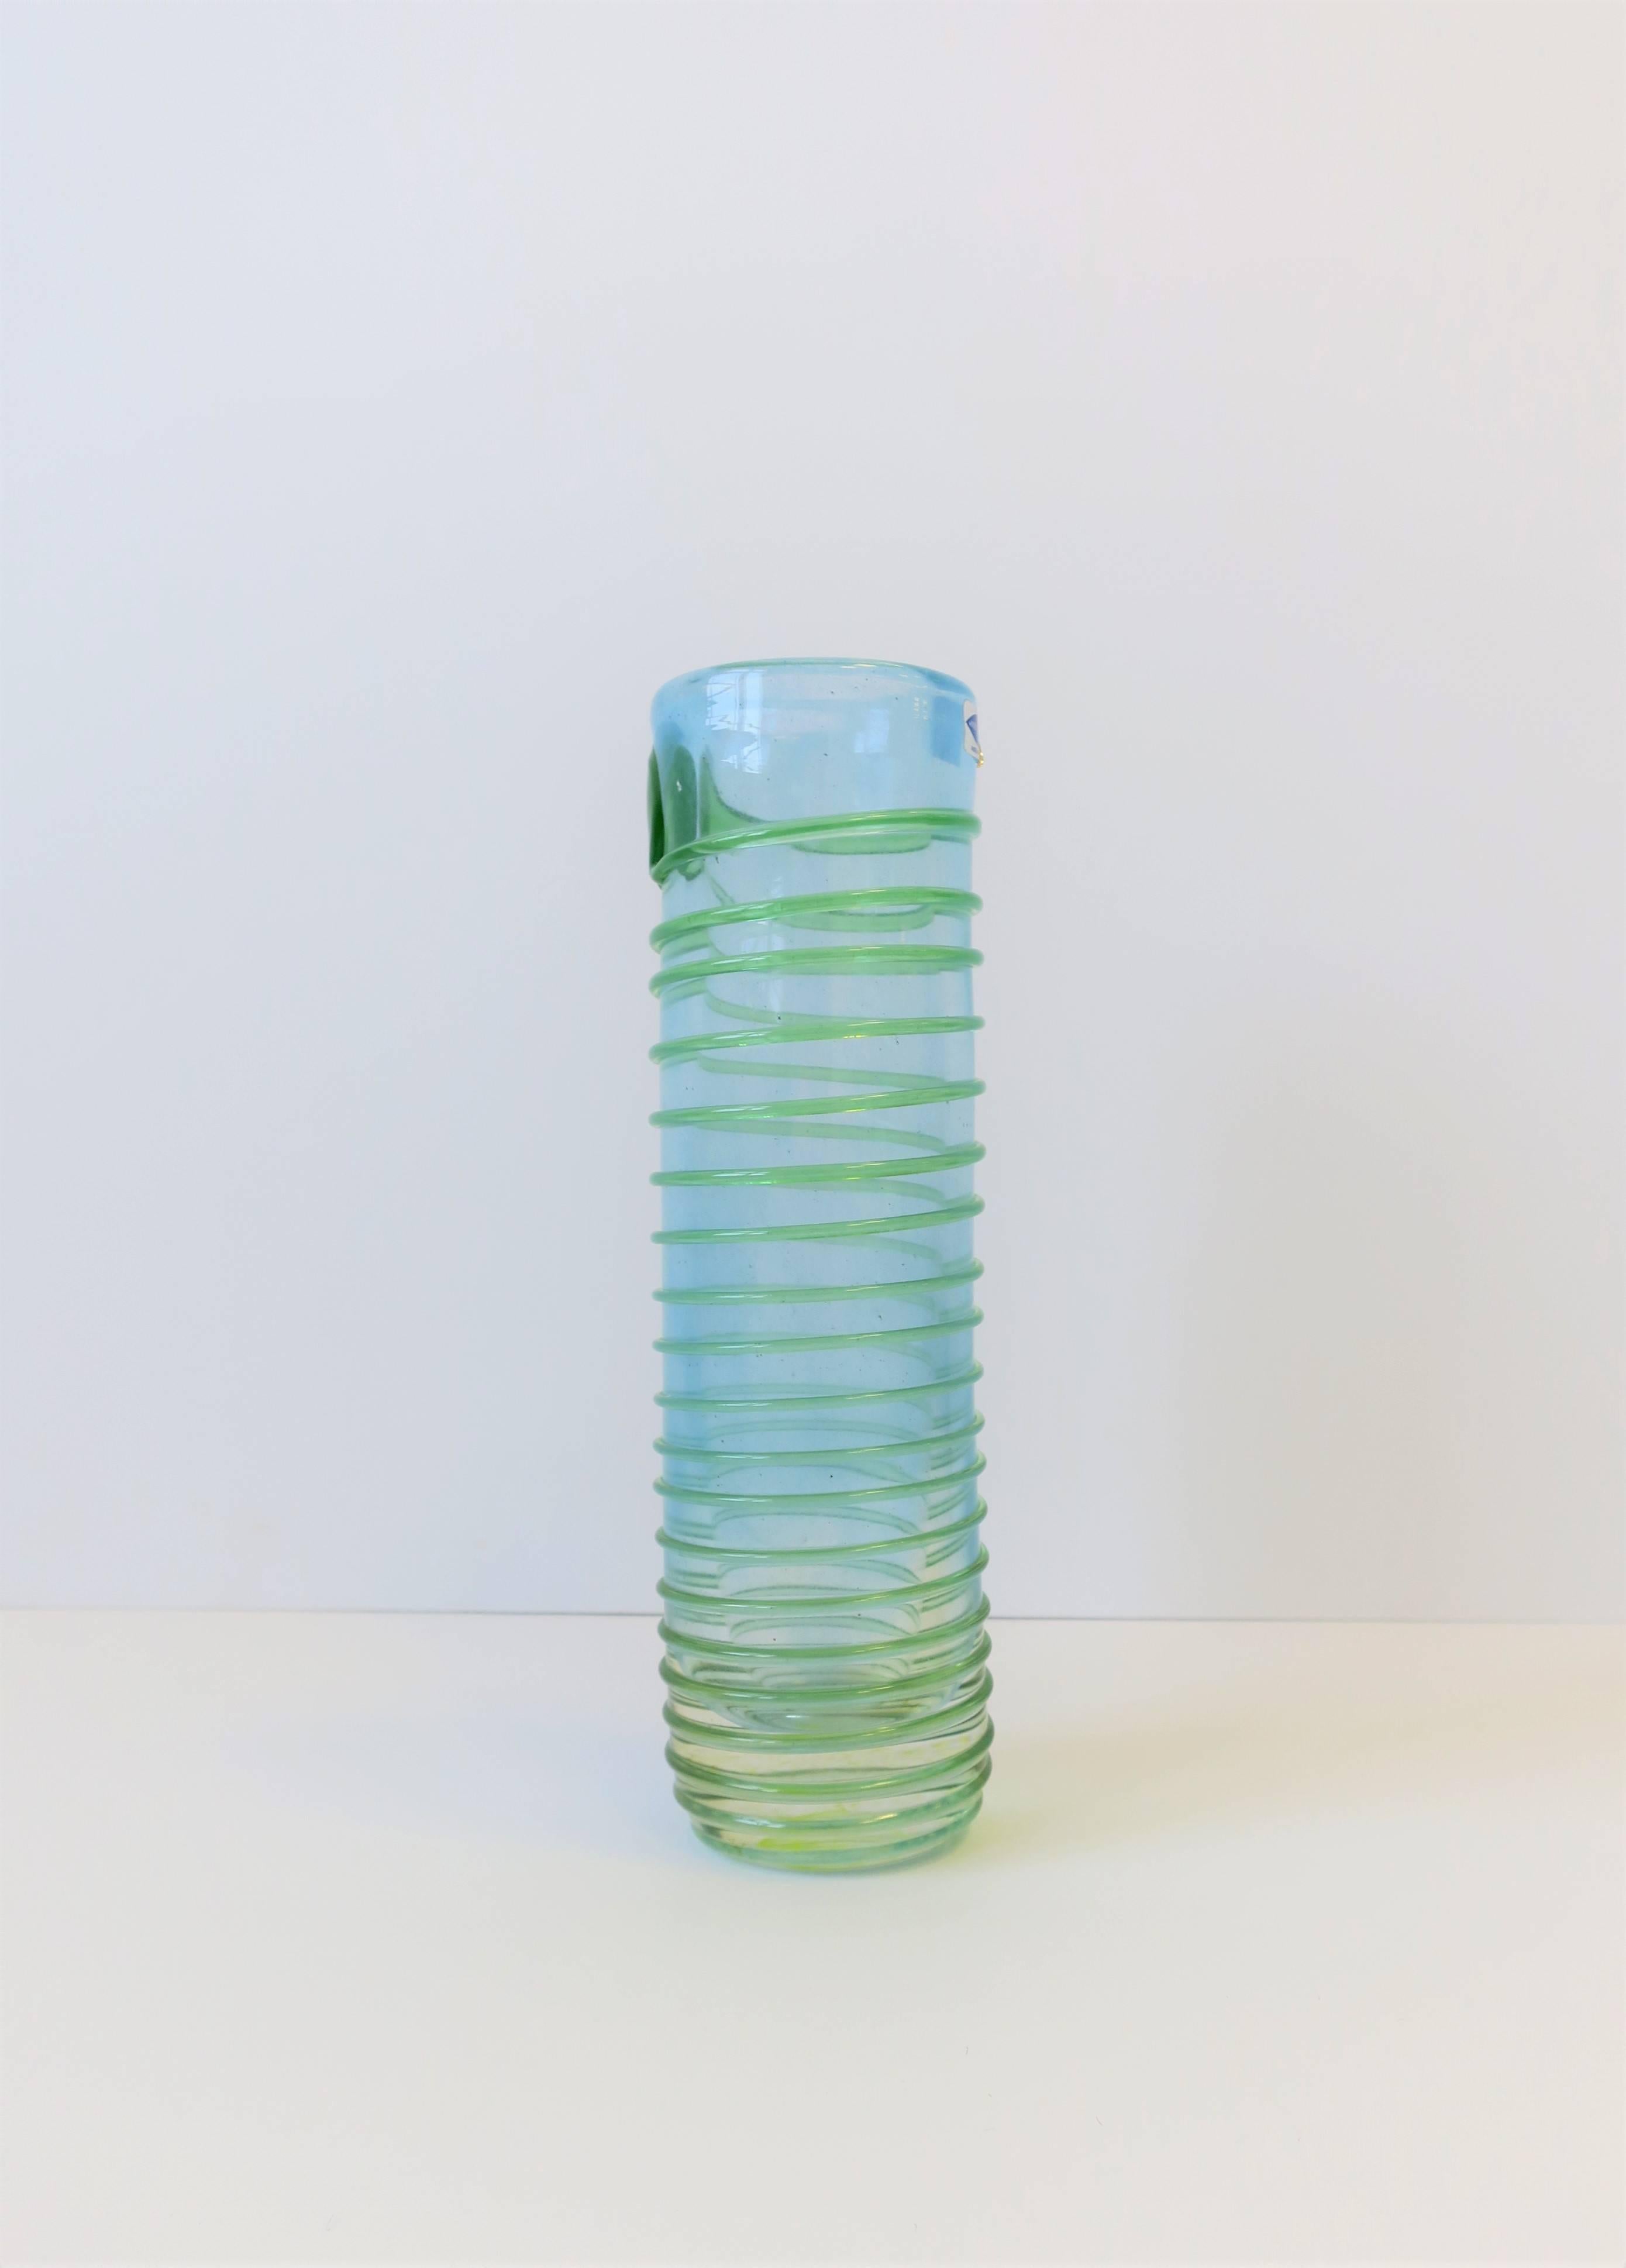 A beautiful signed Finnish art glass vase, circa 20th century, Finland. Piece is signed on bottom as show in image #14. Marker's mark label, image #15. Art glass colors include a translucence light blue wrapped with an emerald green art glass.